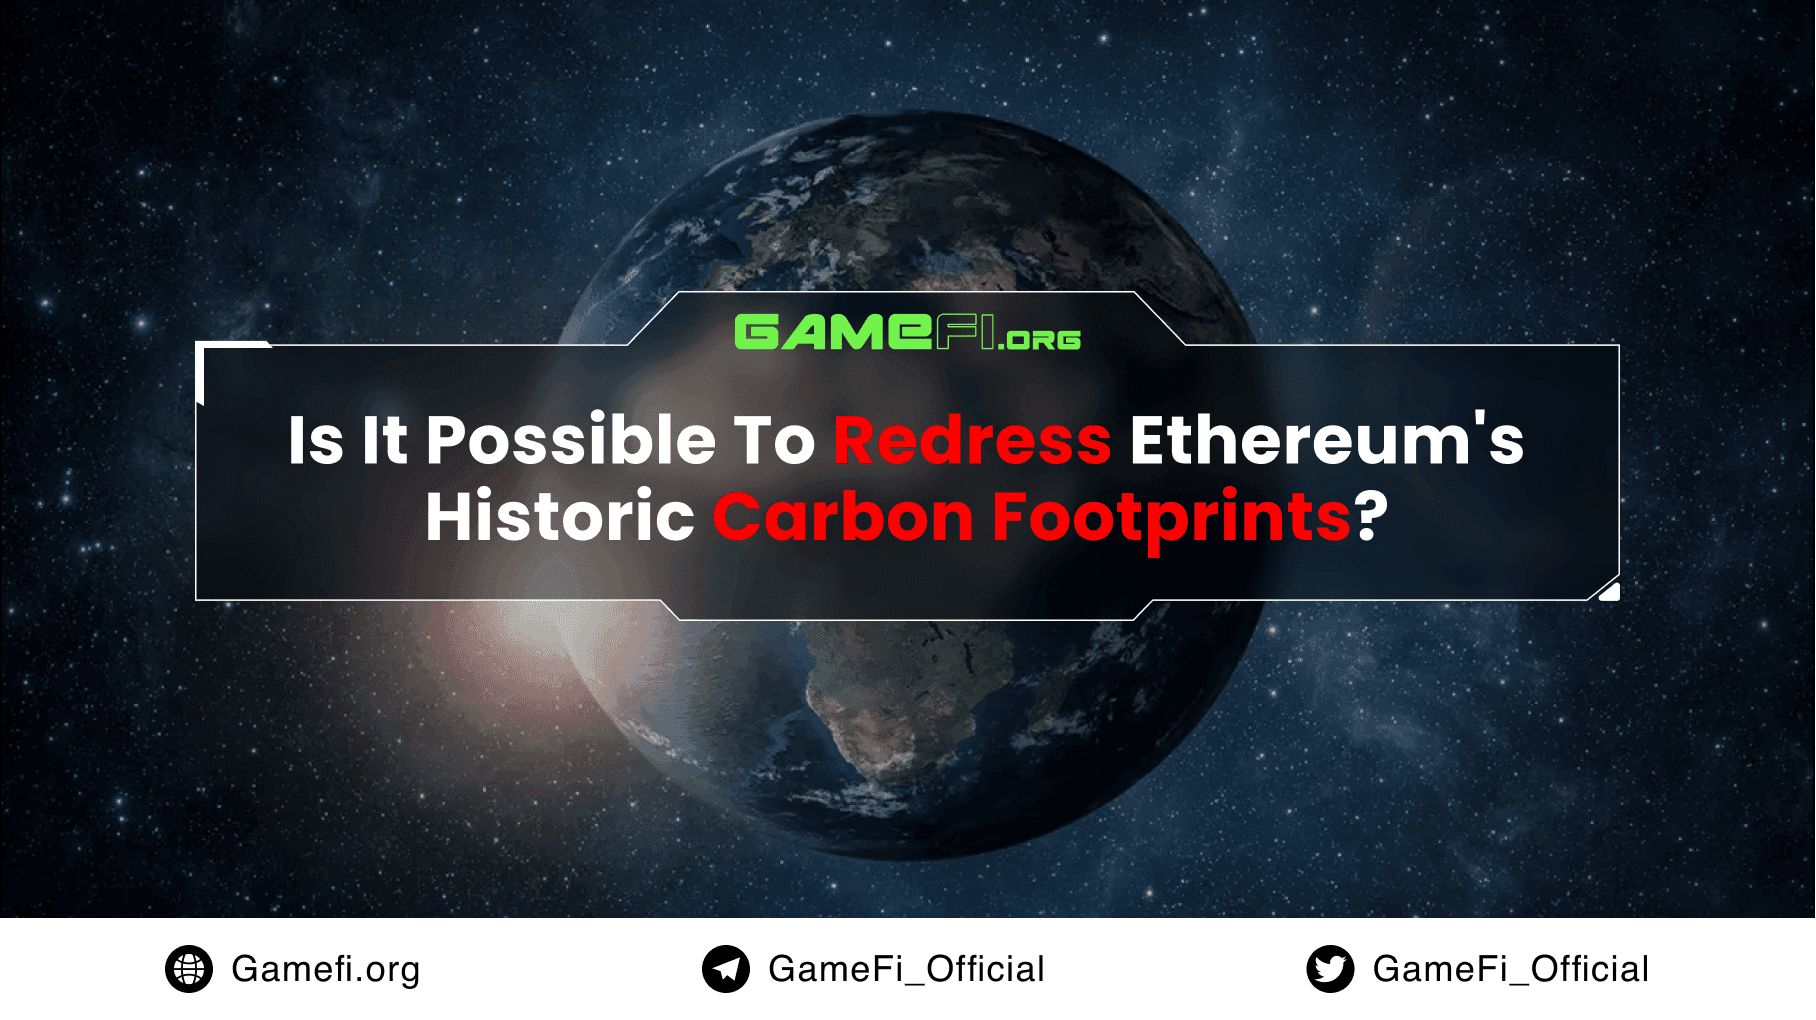 Is It Possible to Redress Ethereum's Historic Carbon Footprints?